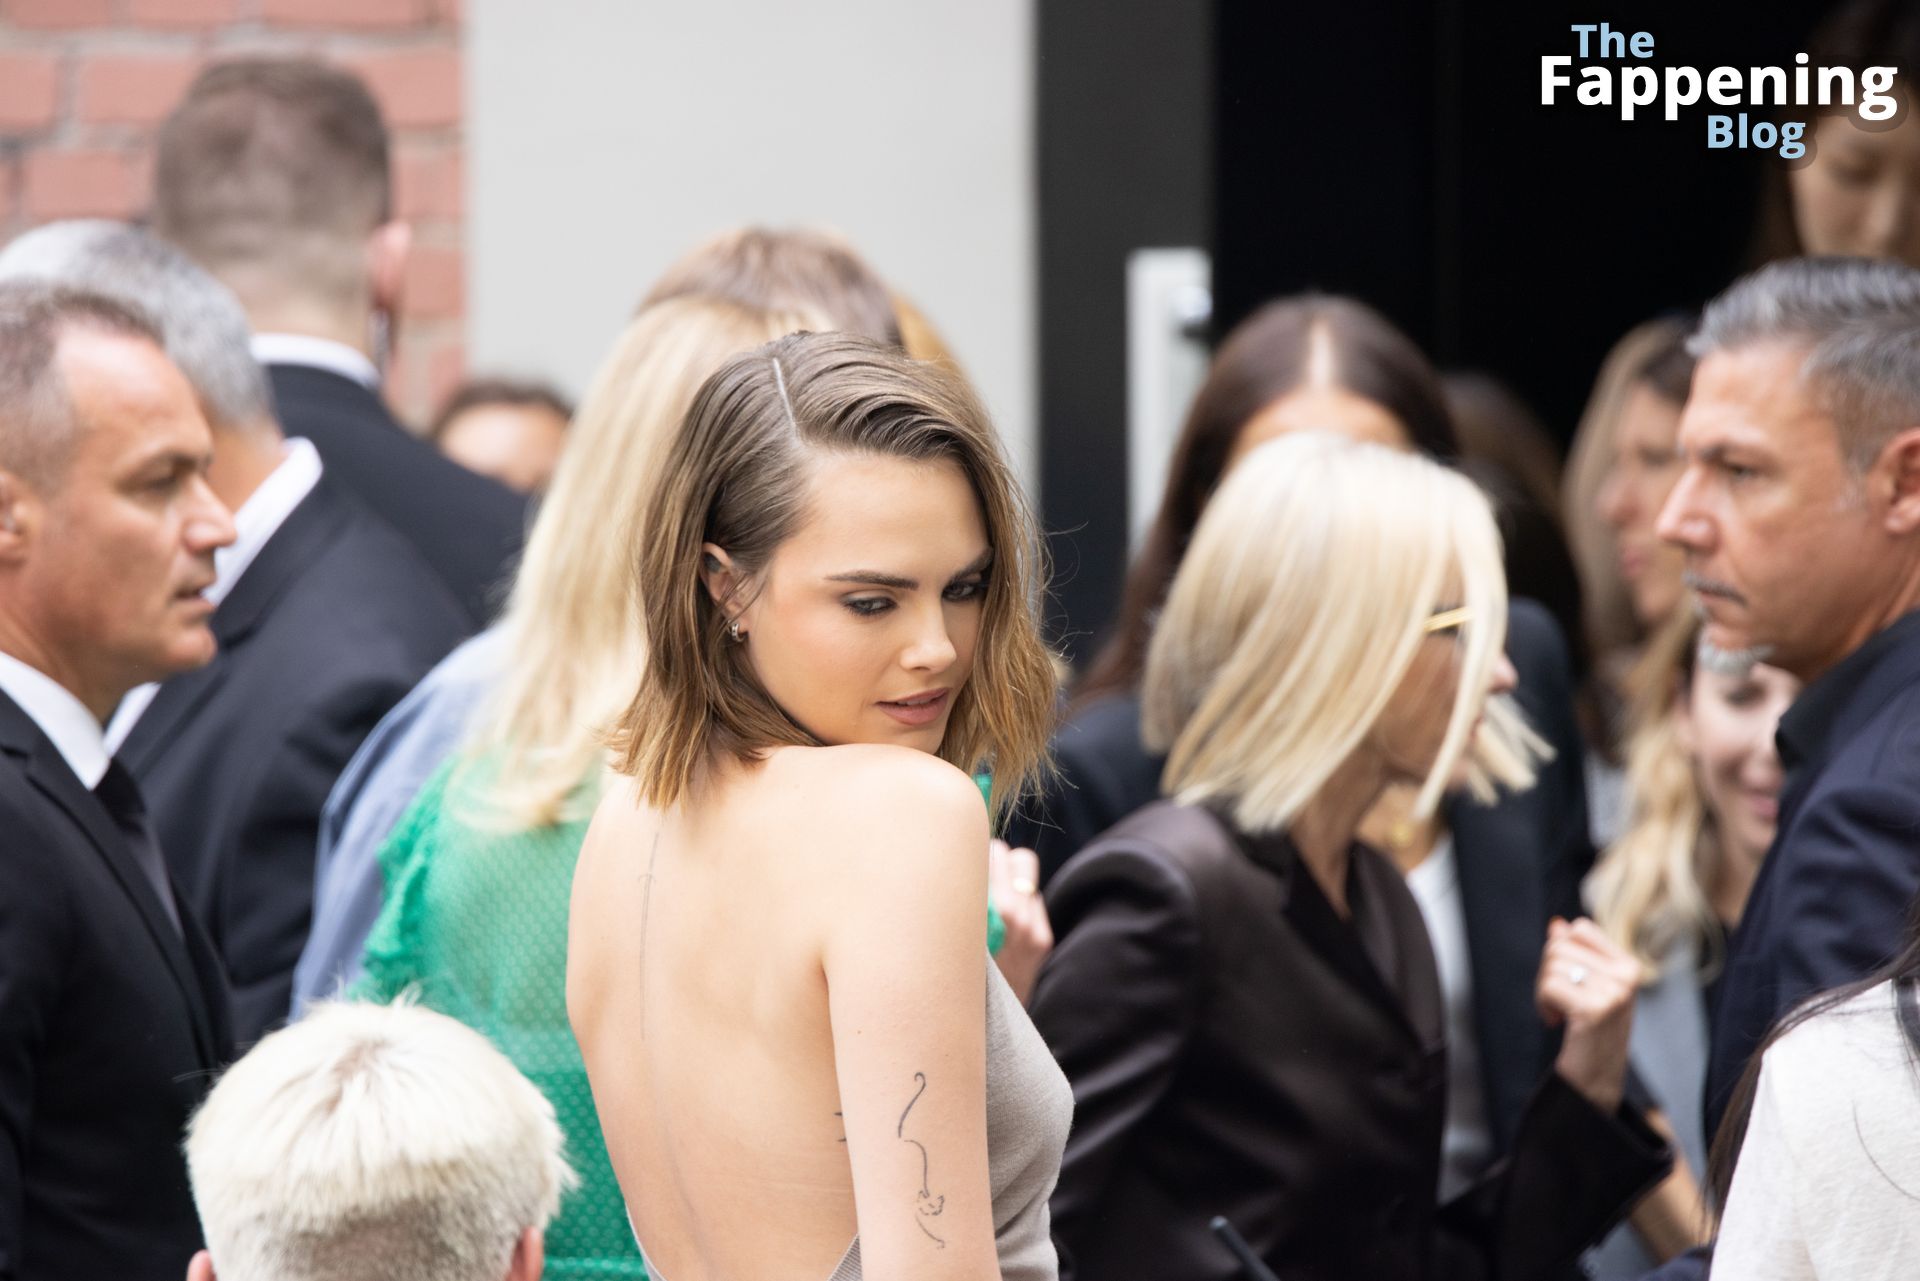 Cara-Delevingne-Sexy-66-The-Fappening-Blog.jpg